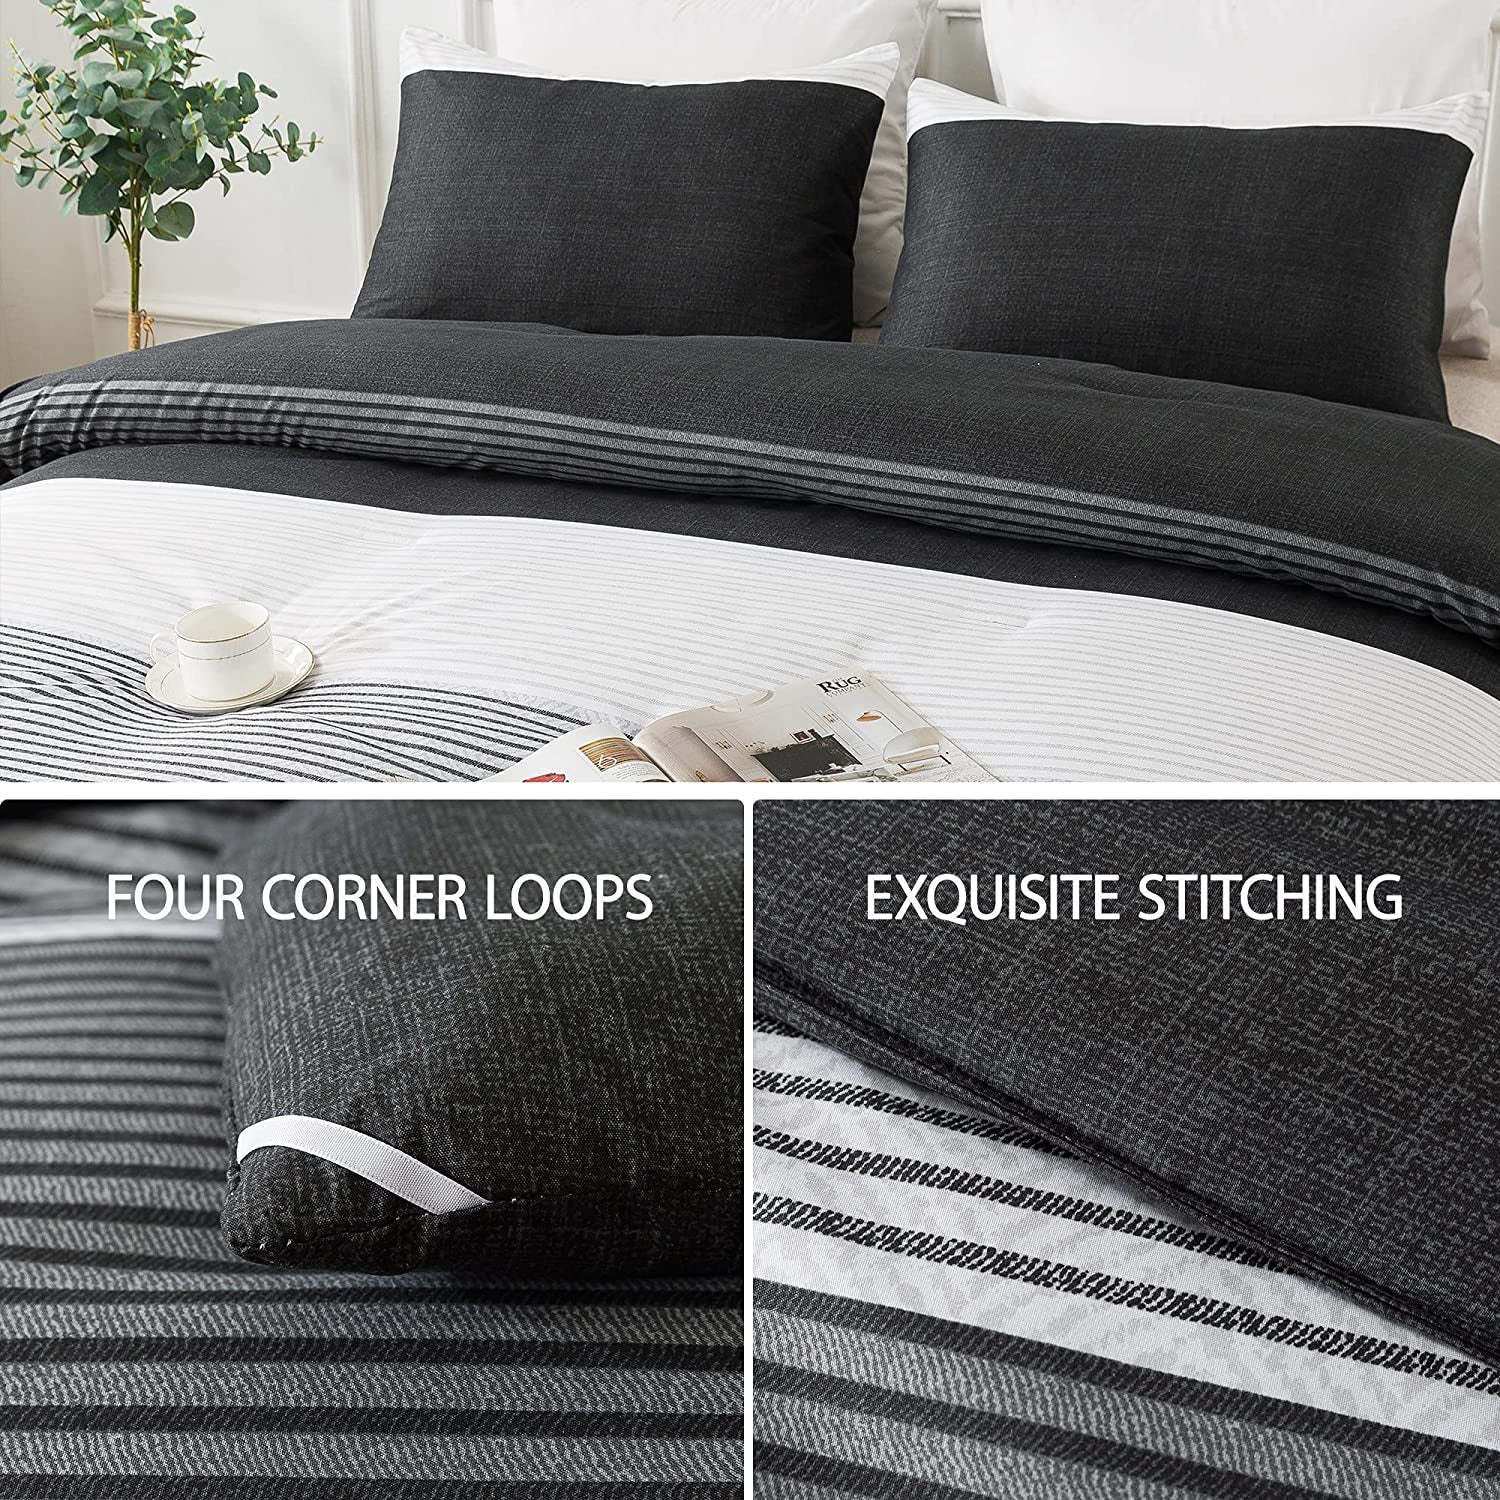 Black Comforter King Size, 3 Pieces Black White Gray Patchwork Striped Comforter (104X90 Inch), Soft Microfiber down Alternative King Comforter Bedding Sets with Corner Loops